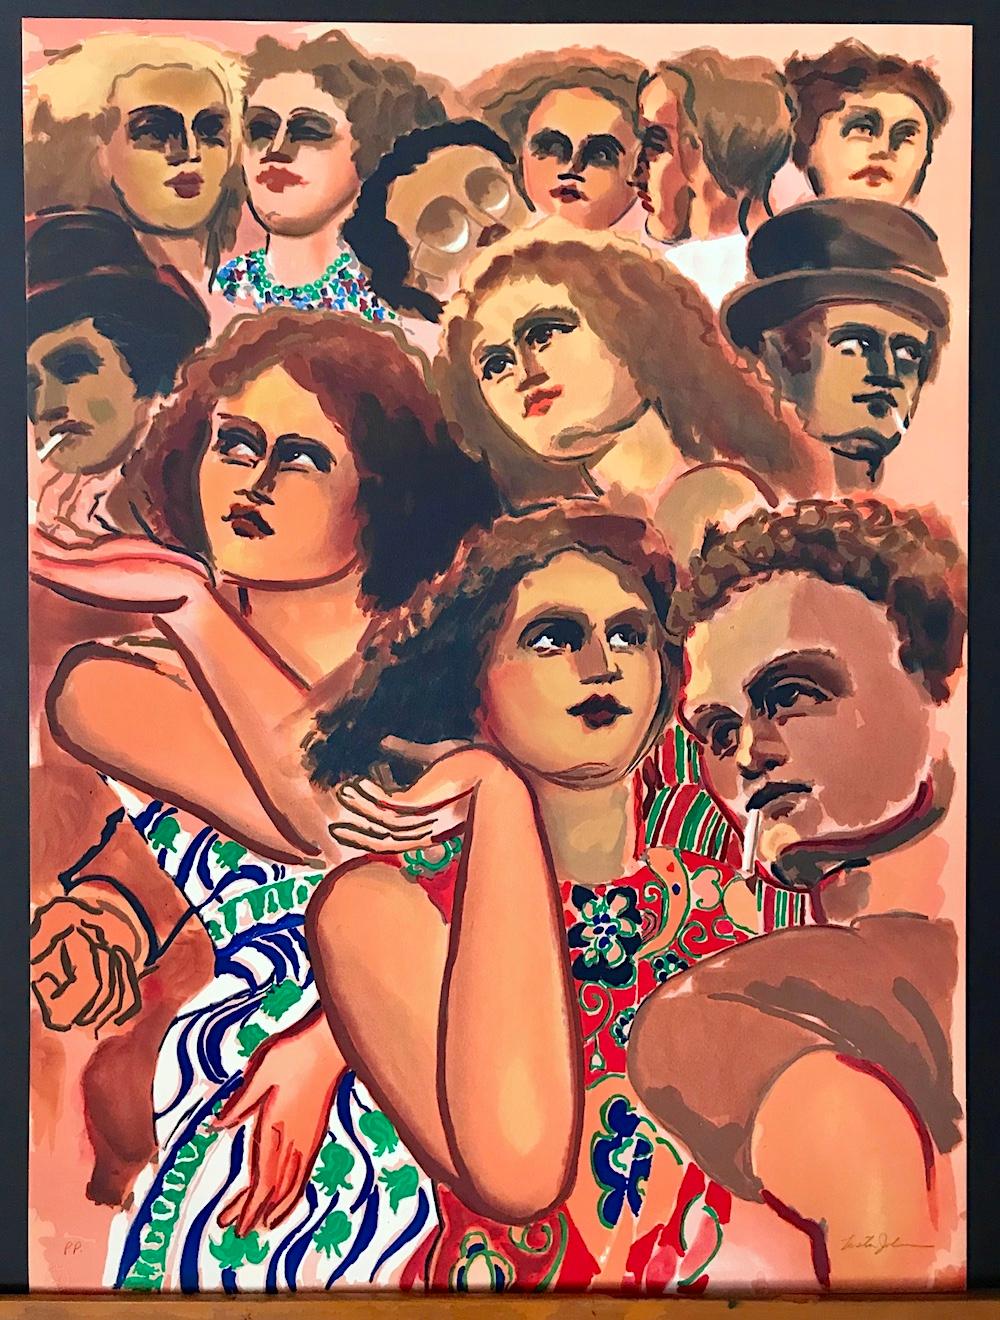 CITY GROUP Signed Lithograph, Street Crowd, Women Men Faces, Peach Orange Brown - Contemporary Print by Lester Johnson